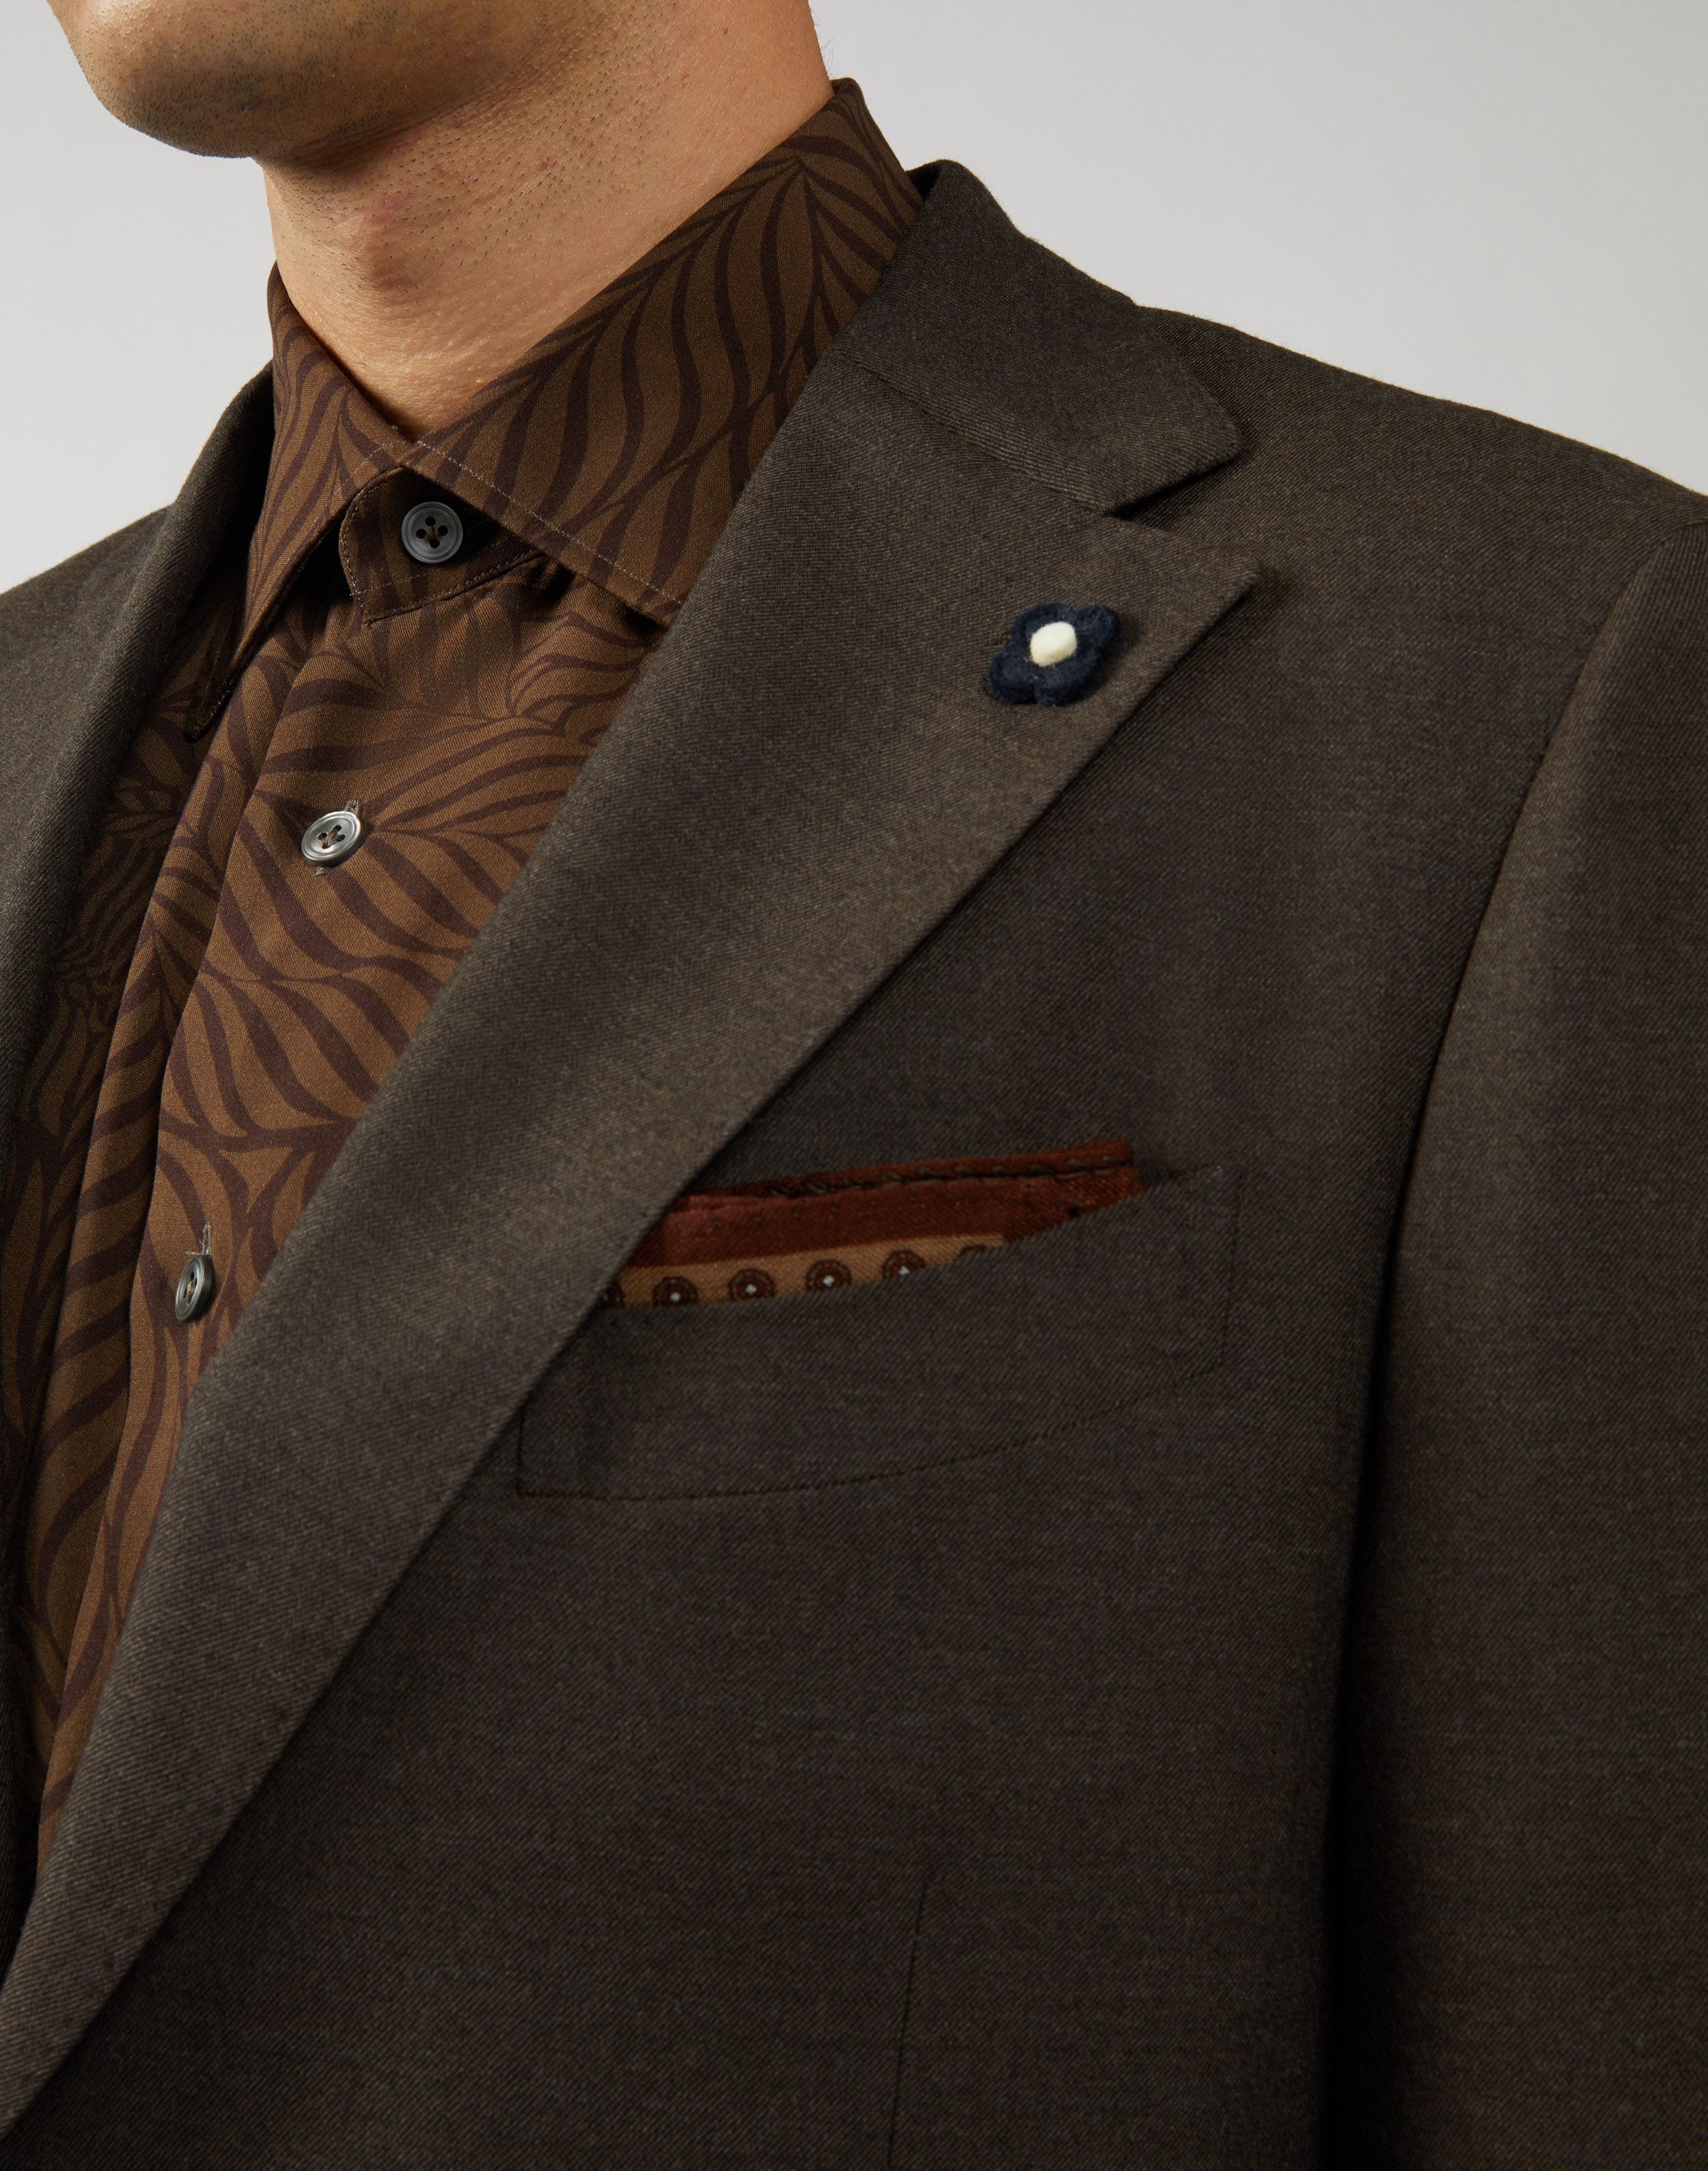 Beige and brown pocket square with geometric print